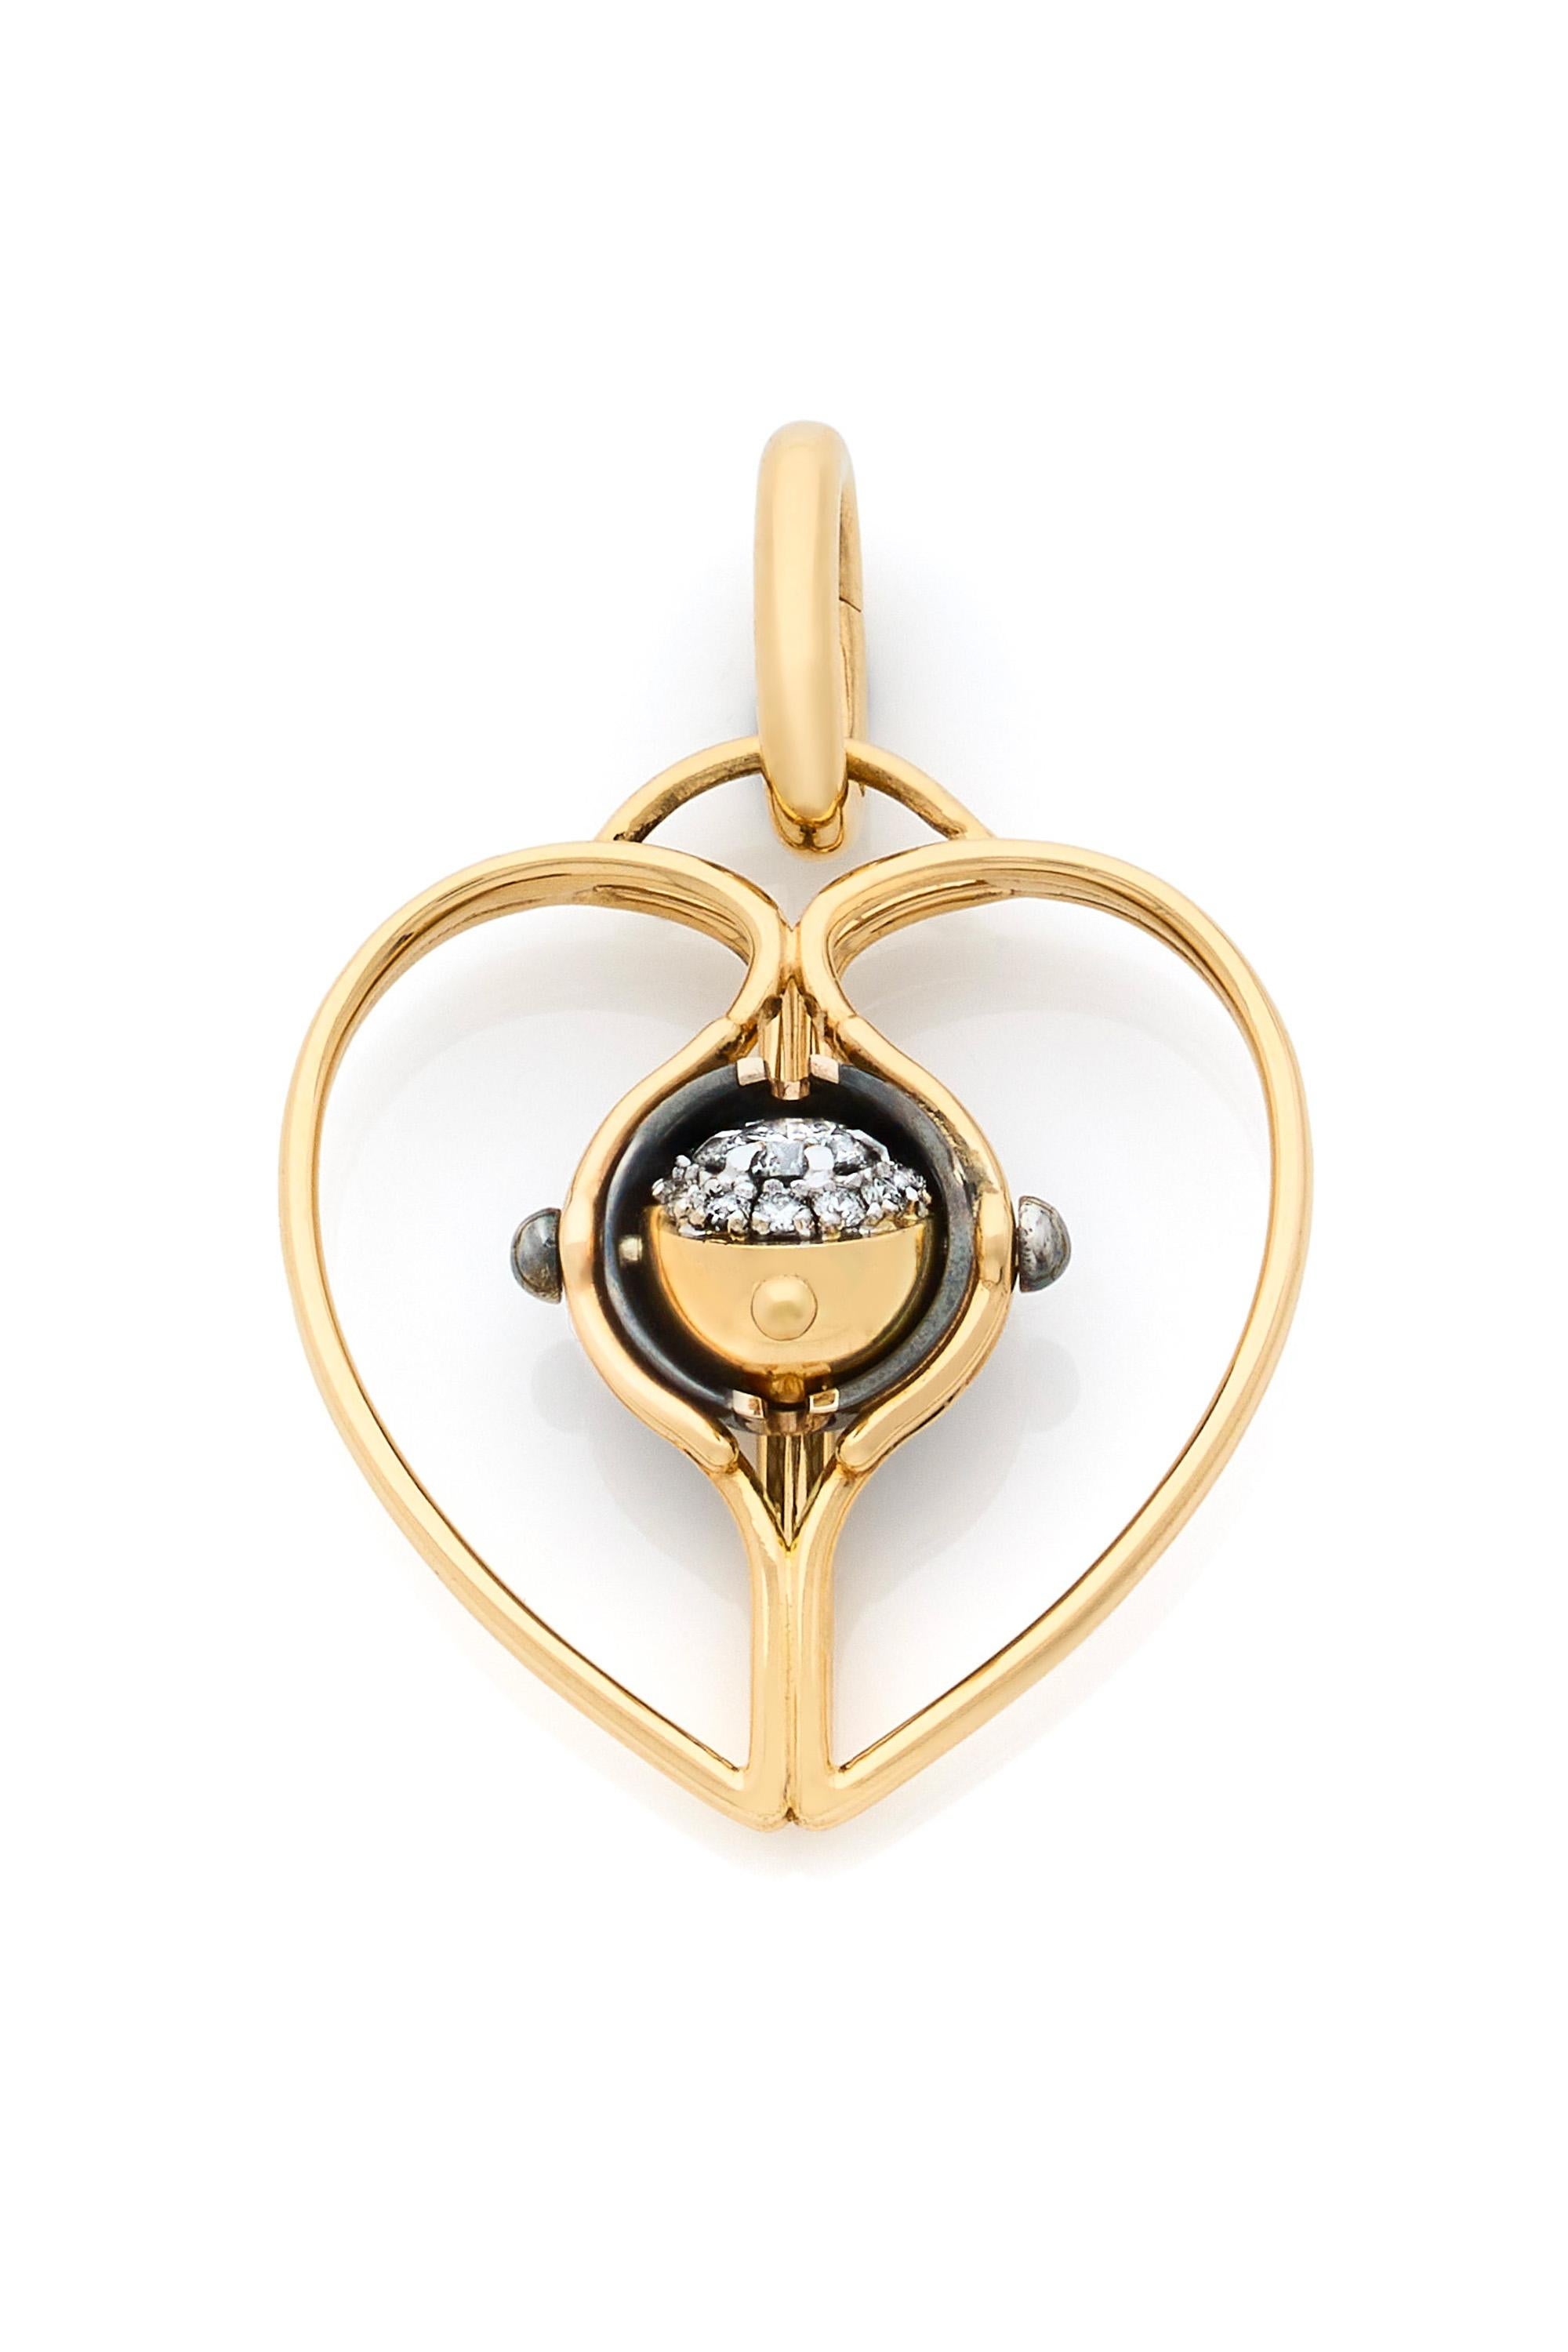 Yellow gold and distressed silver charm. Rotating sphere revealing a diamond  surrounded by white diamonds. Openable gold bail.

Sold without the chain. 

Available with chain on request.

Details:
Central Diamond: 0.23 cts, ø 4mm
12 Diamonds: 0.15